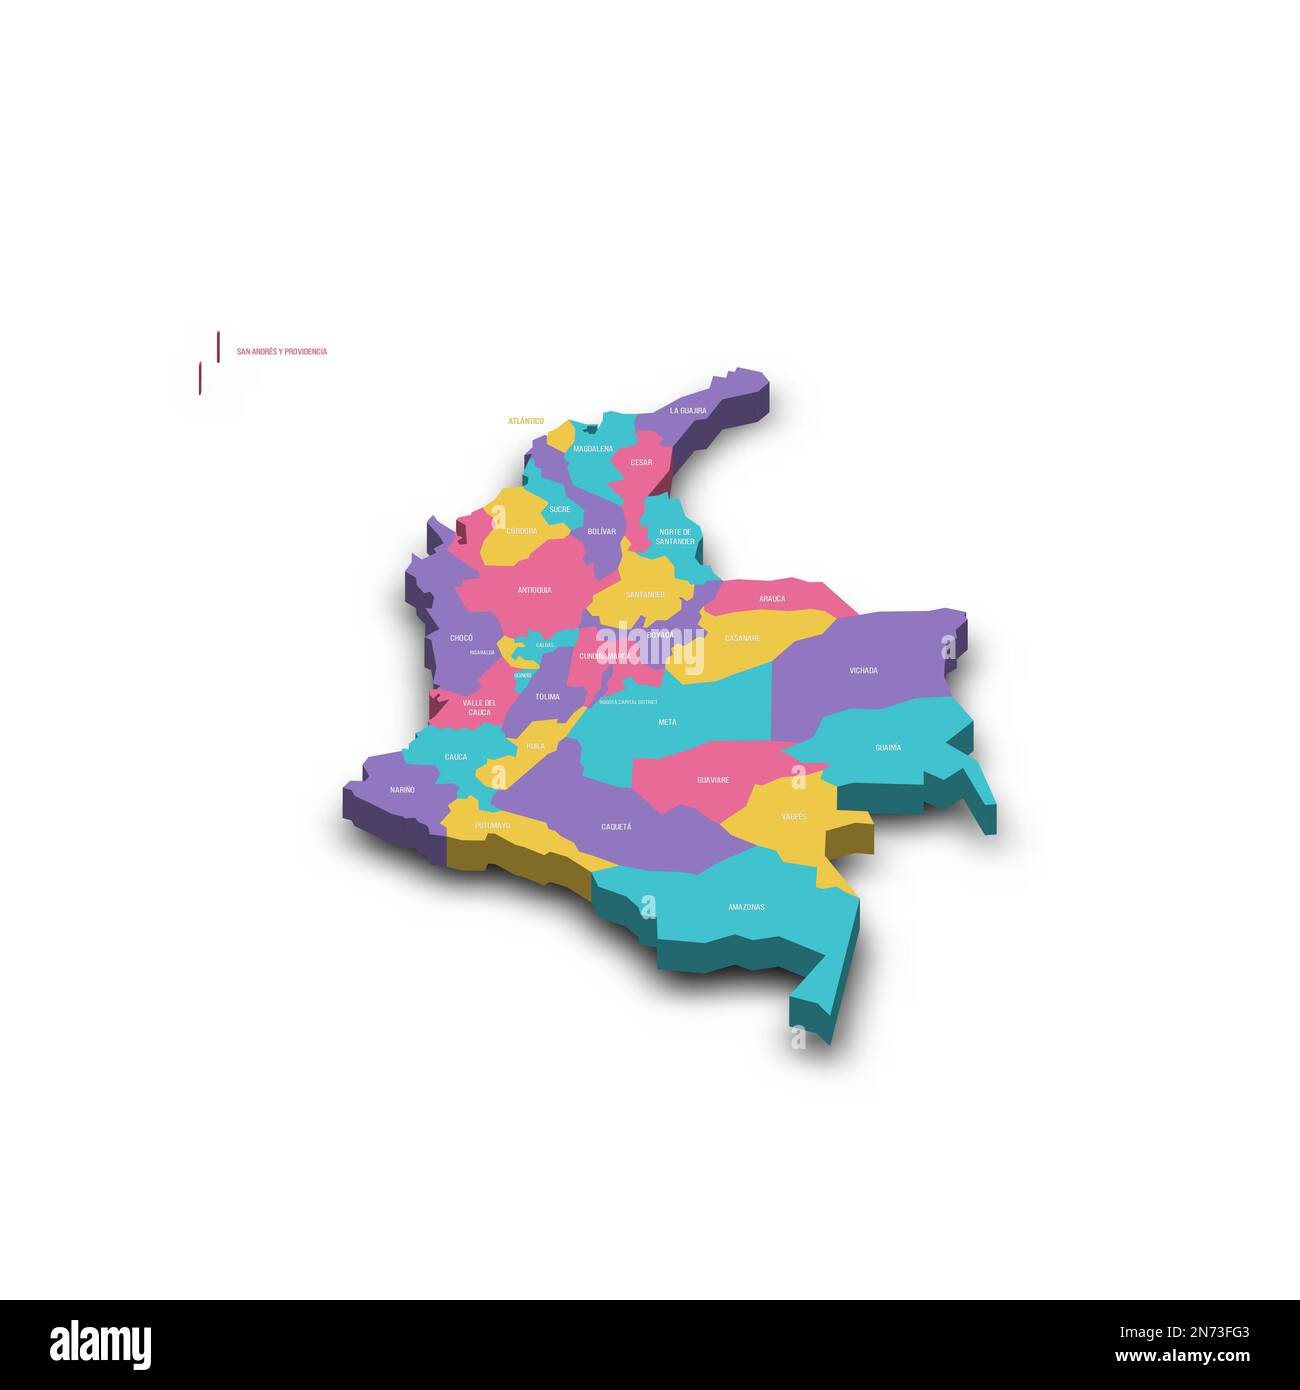 Colombia political map of administrative divisions - departments and capital district. Colorful 3D vector map with dropped shadow and country name labels. Stock Vector